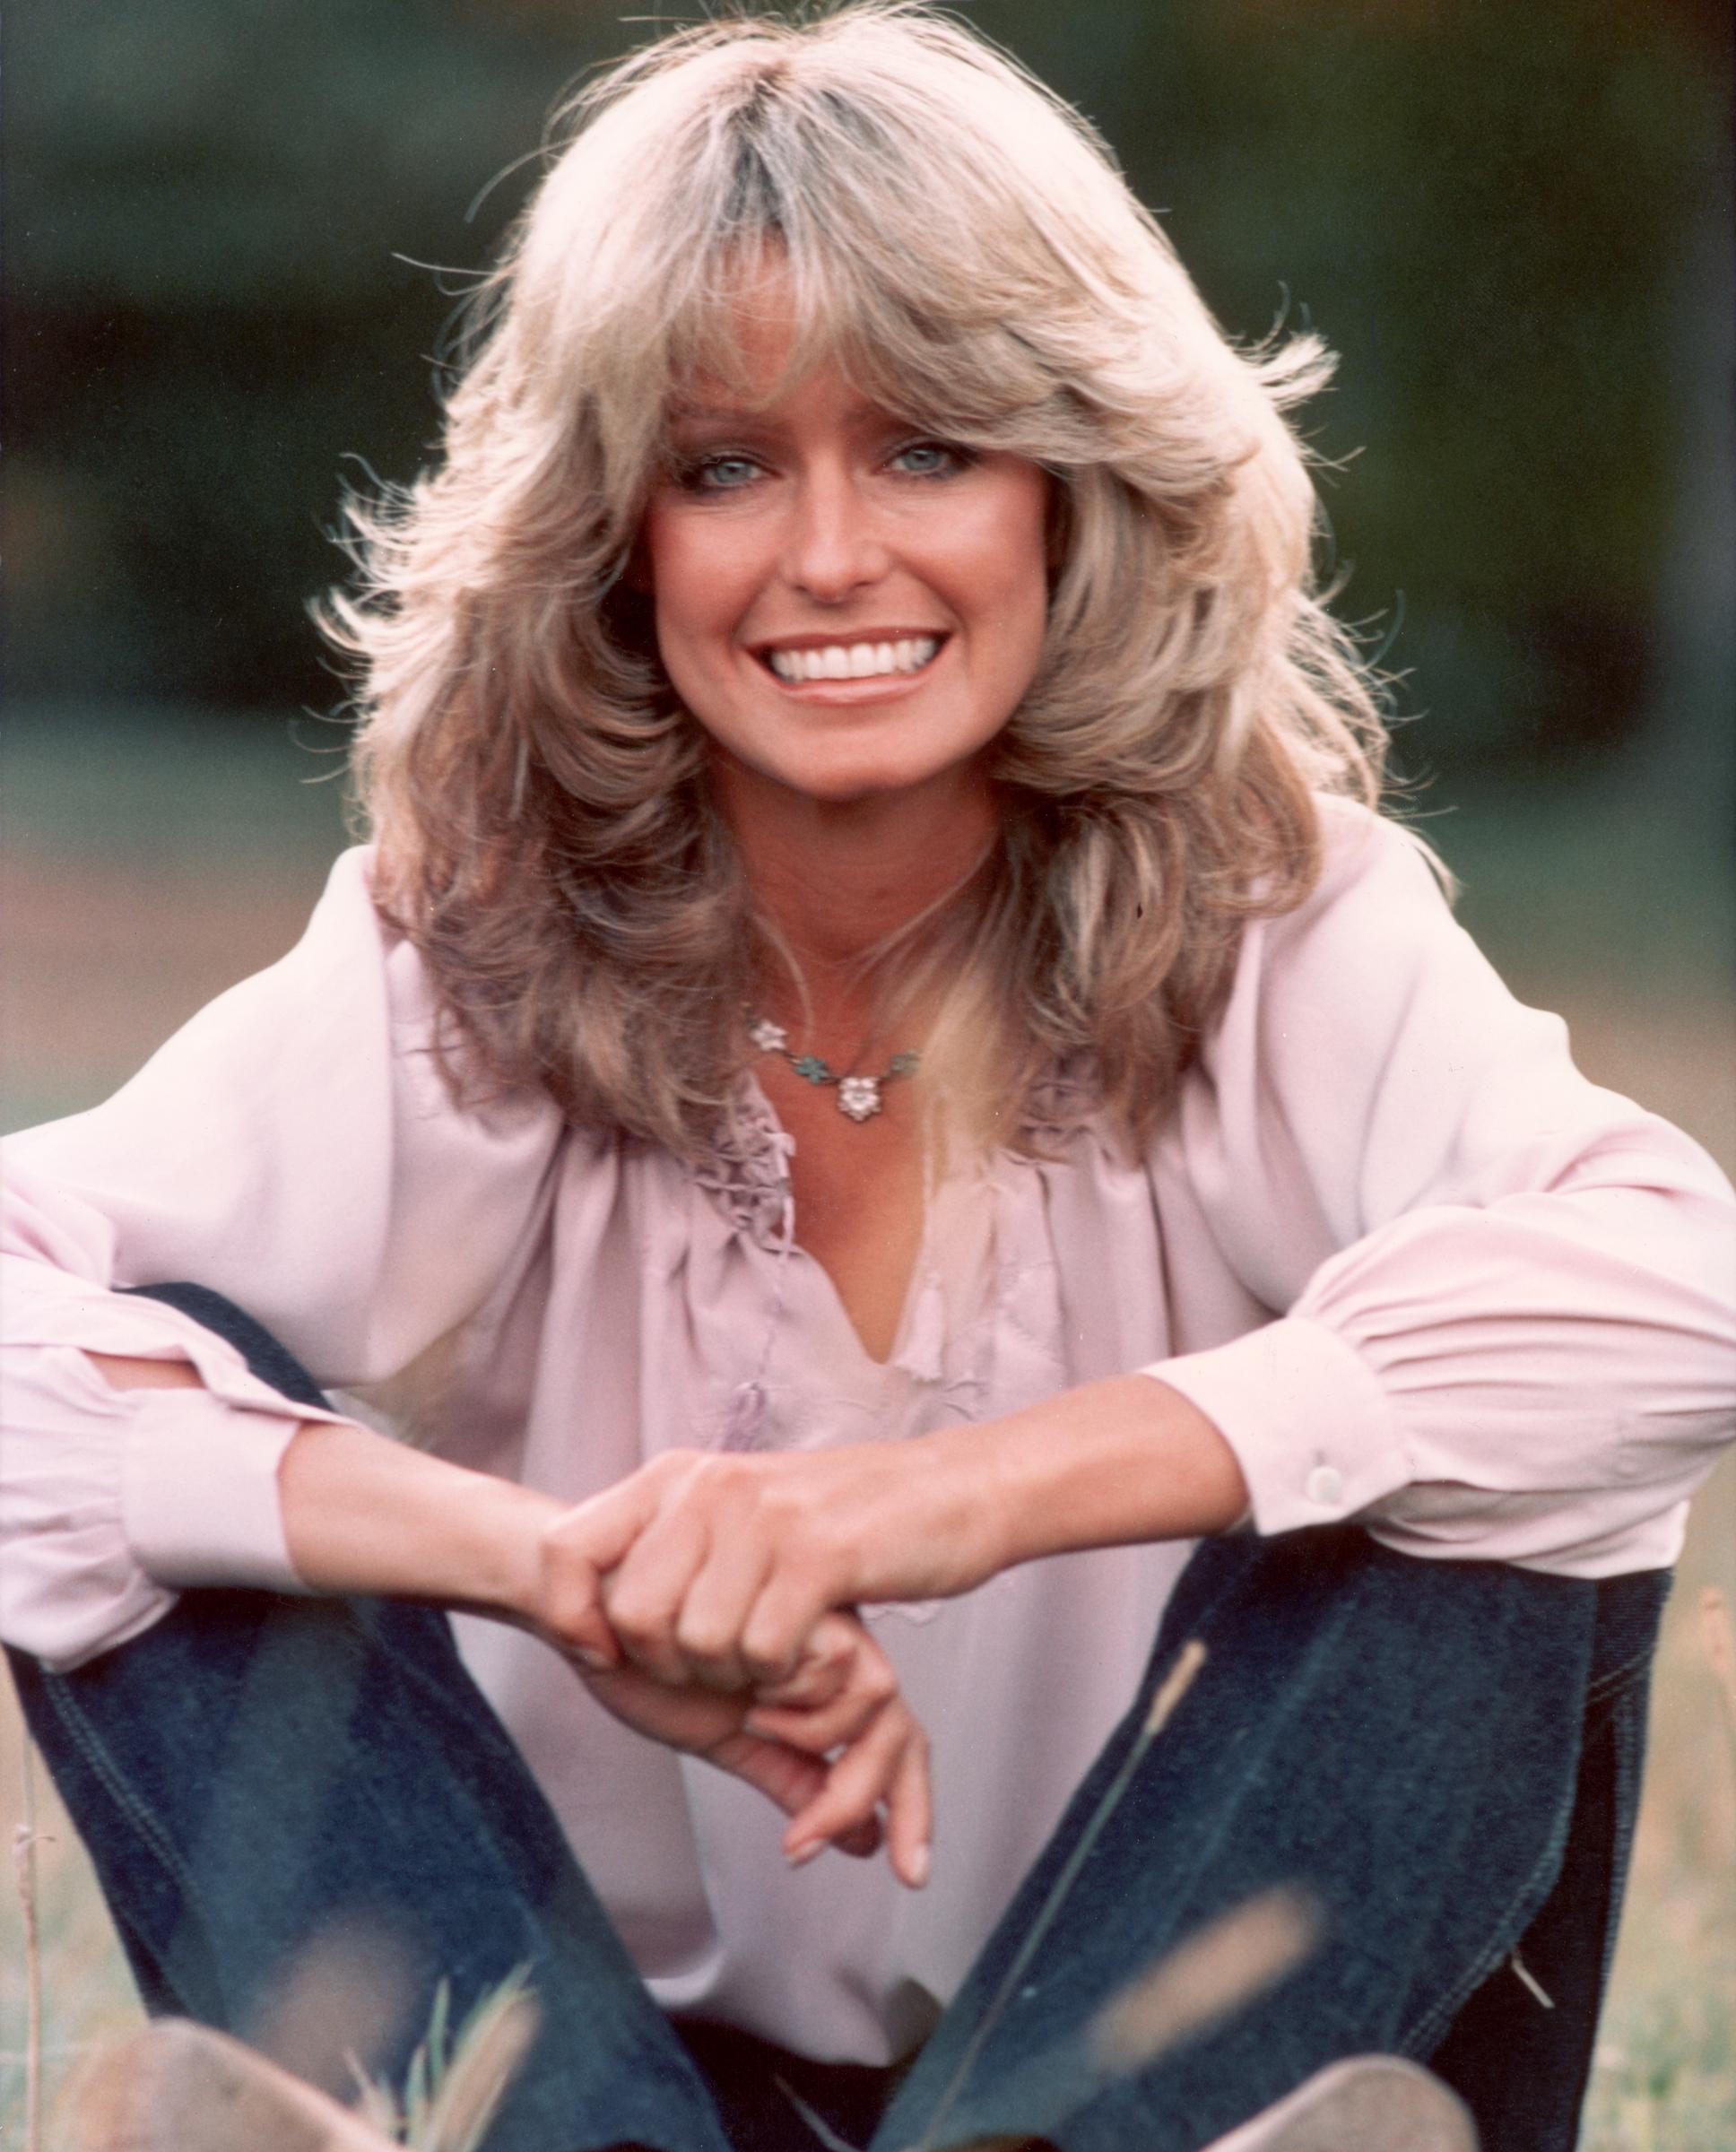 Farrah Fawcett poses for a photo in 1975 | Source: Getty Images